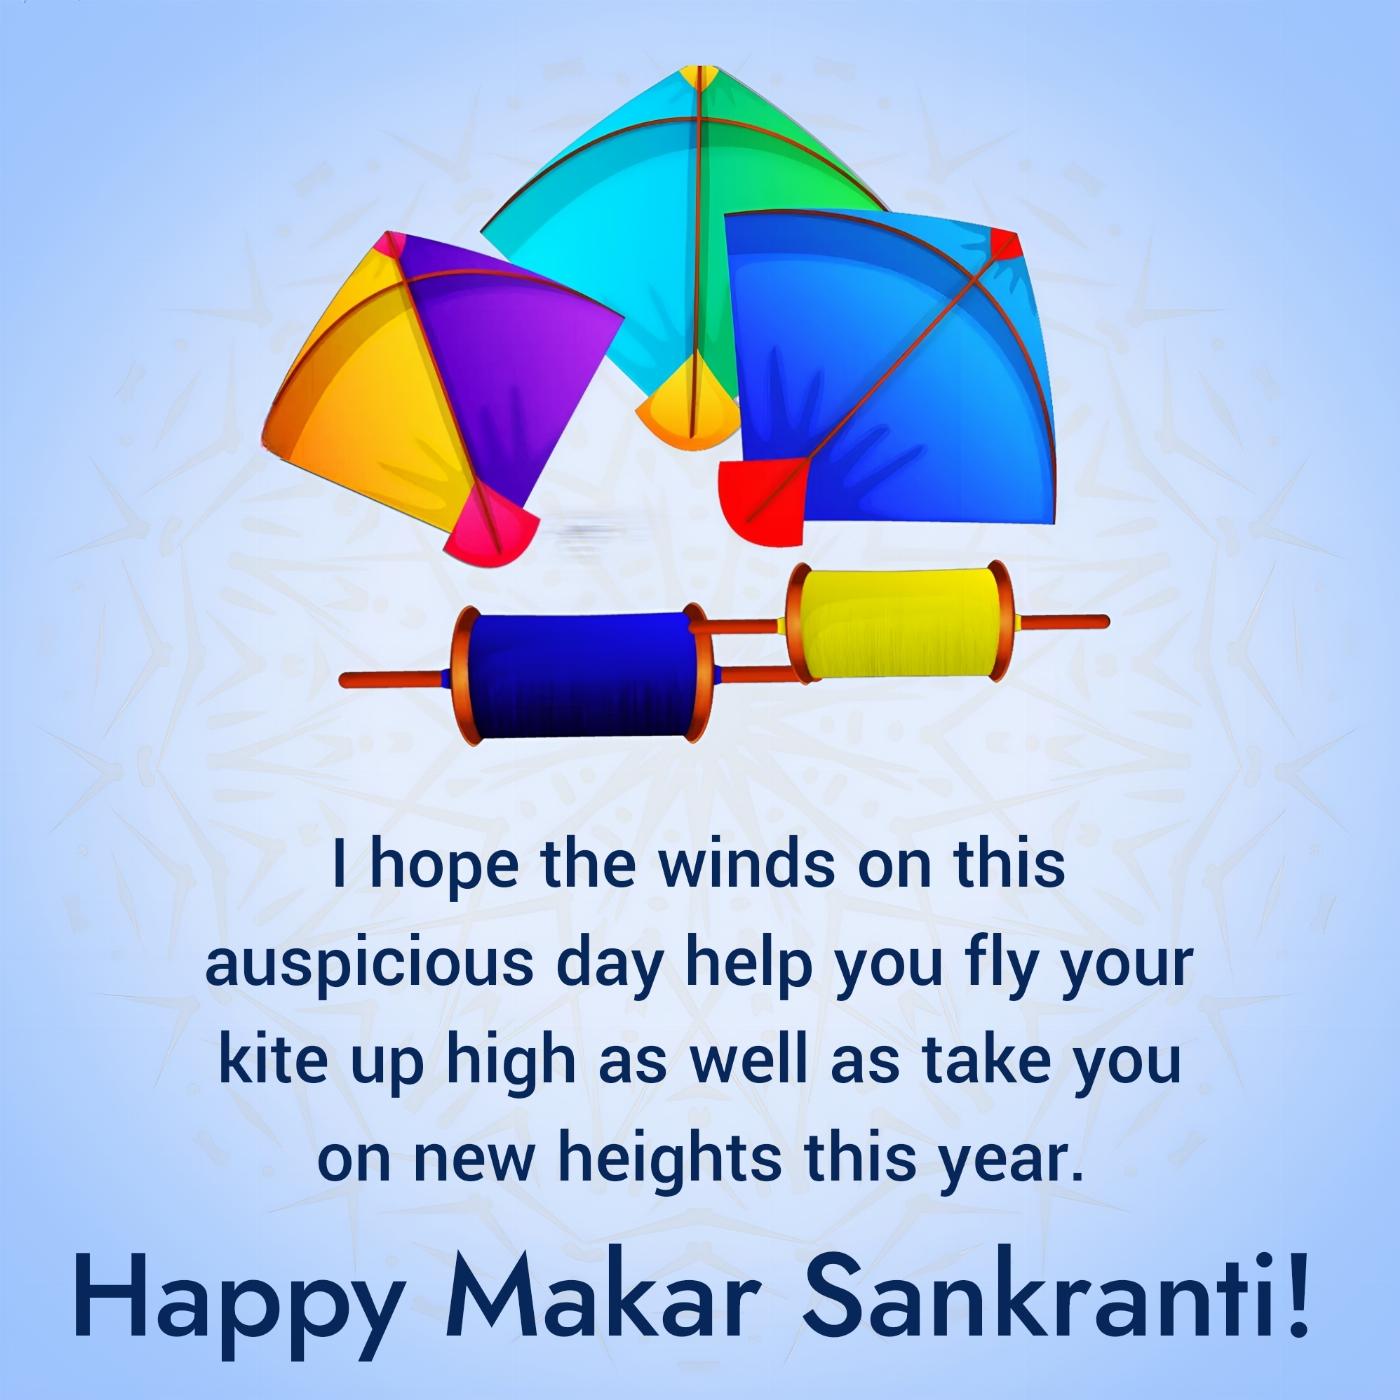 I hope the winds on this auspicious day help you fly your kite